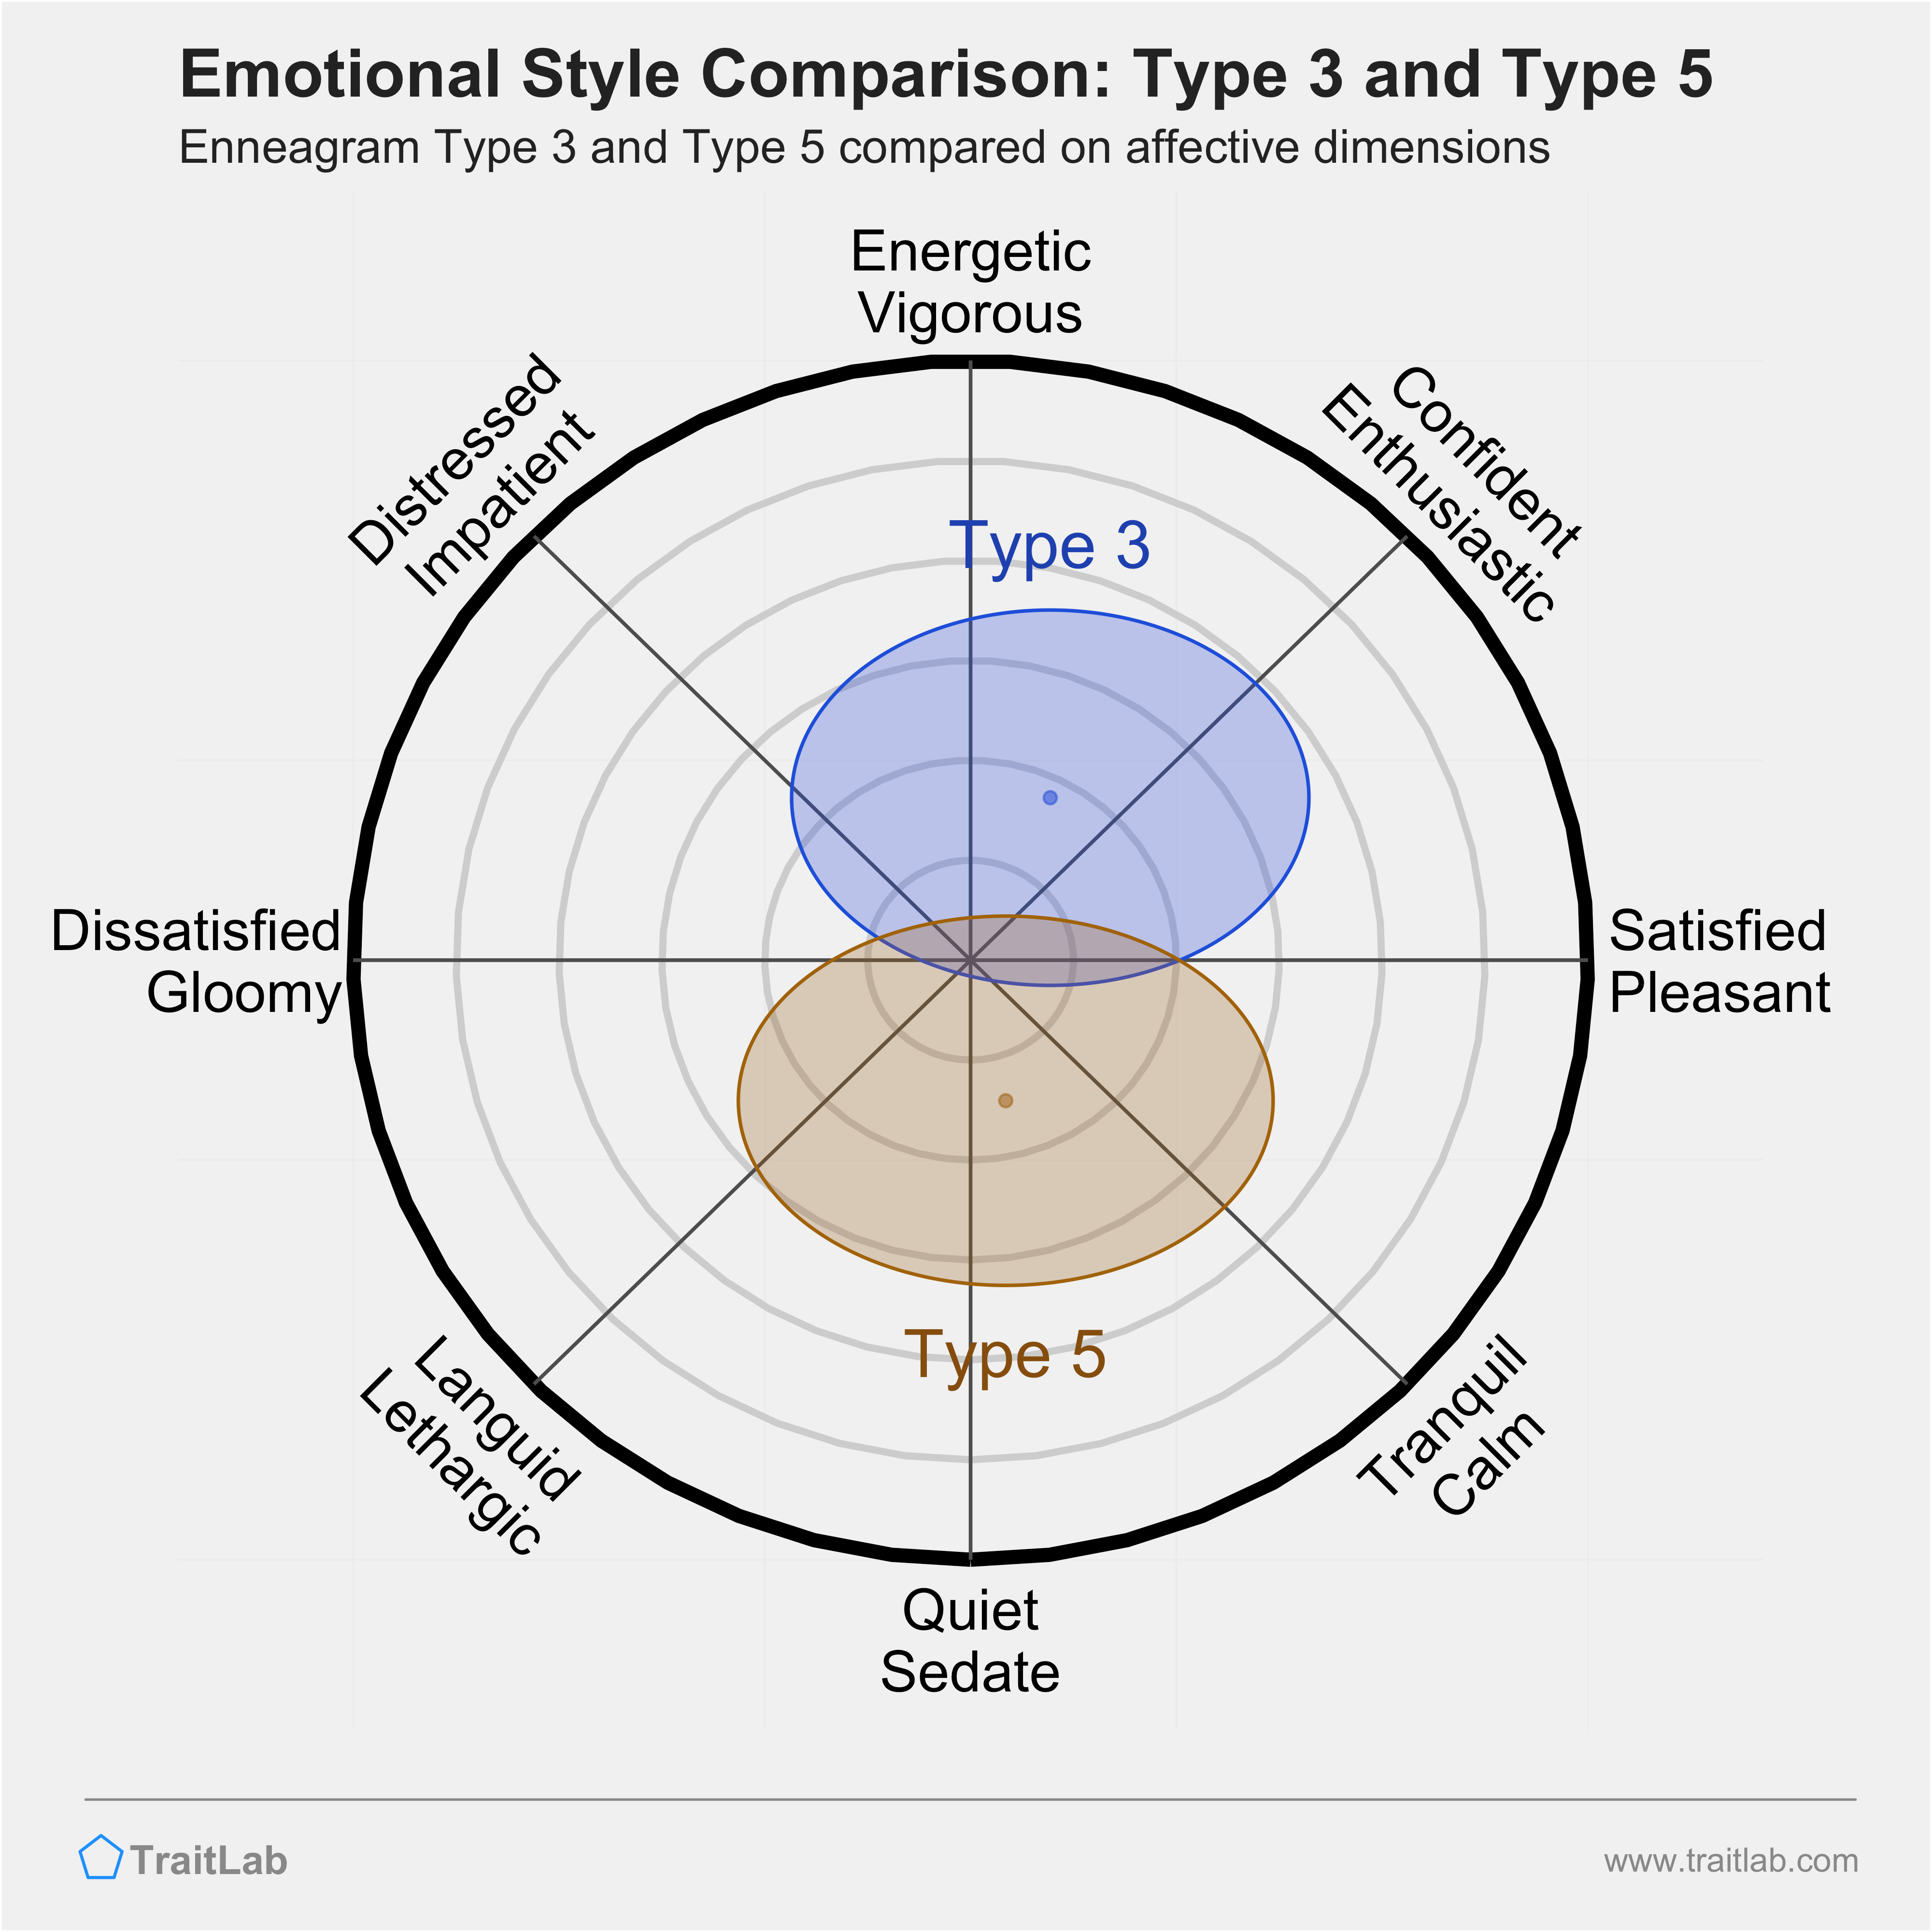 Type 3 and Type 5 comparison across emotional (affective) dimensions